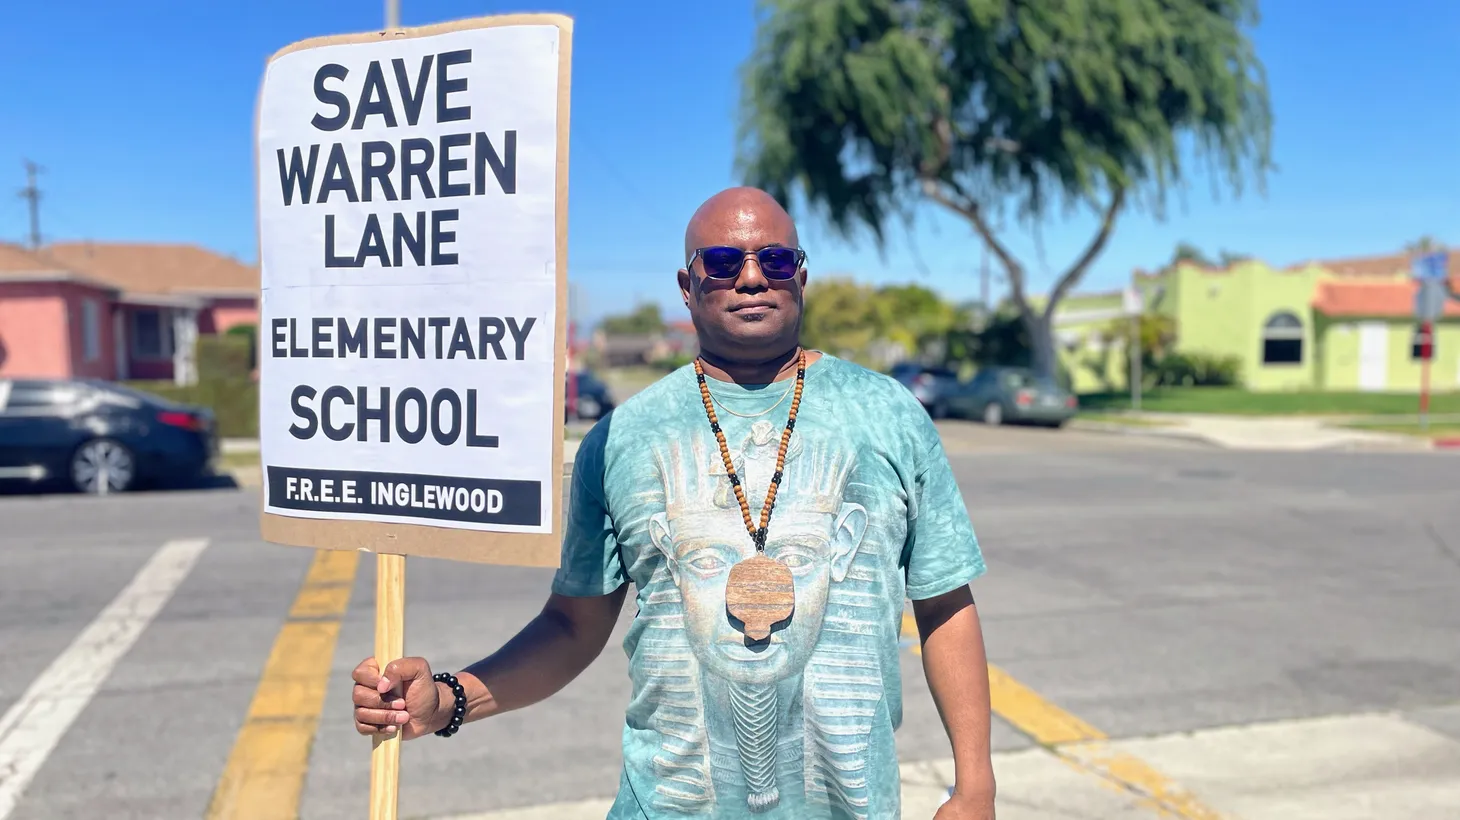 John Hughes peacefully protested the planned closure of Warren Lane Elementary School on March 24, 2022.